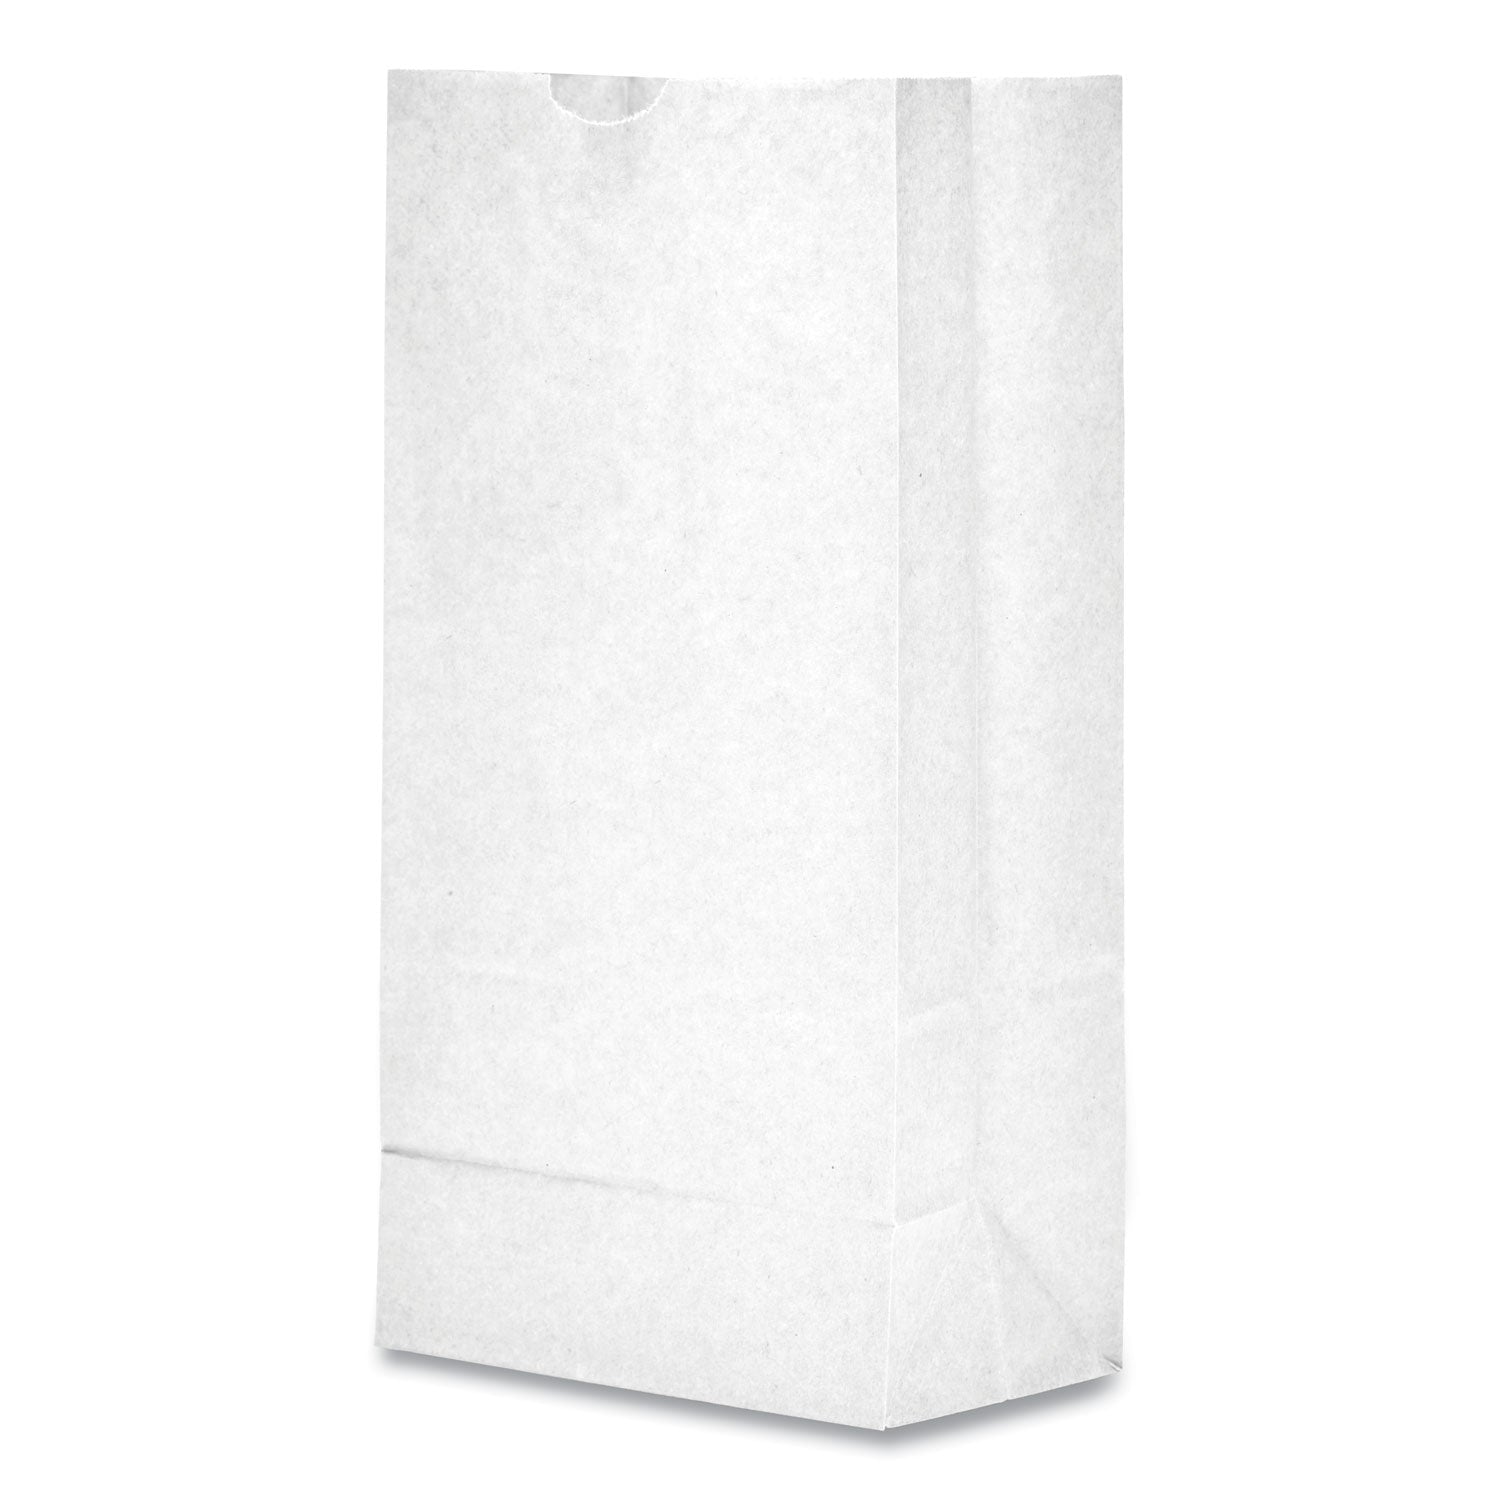 grocery-paper-bags-35-lb-capacity-#10-631-x-419-x-1338-white-500-bags_baggw10500 - 2